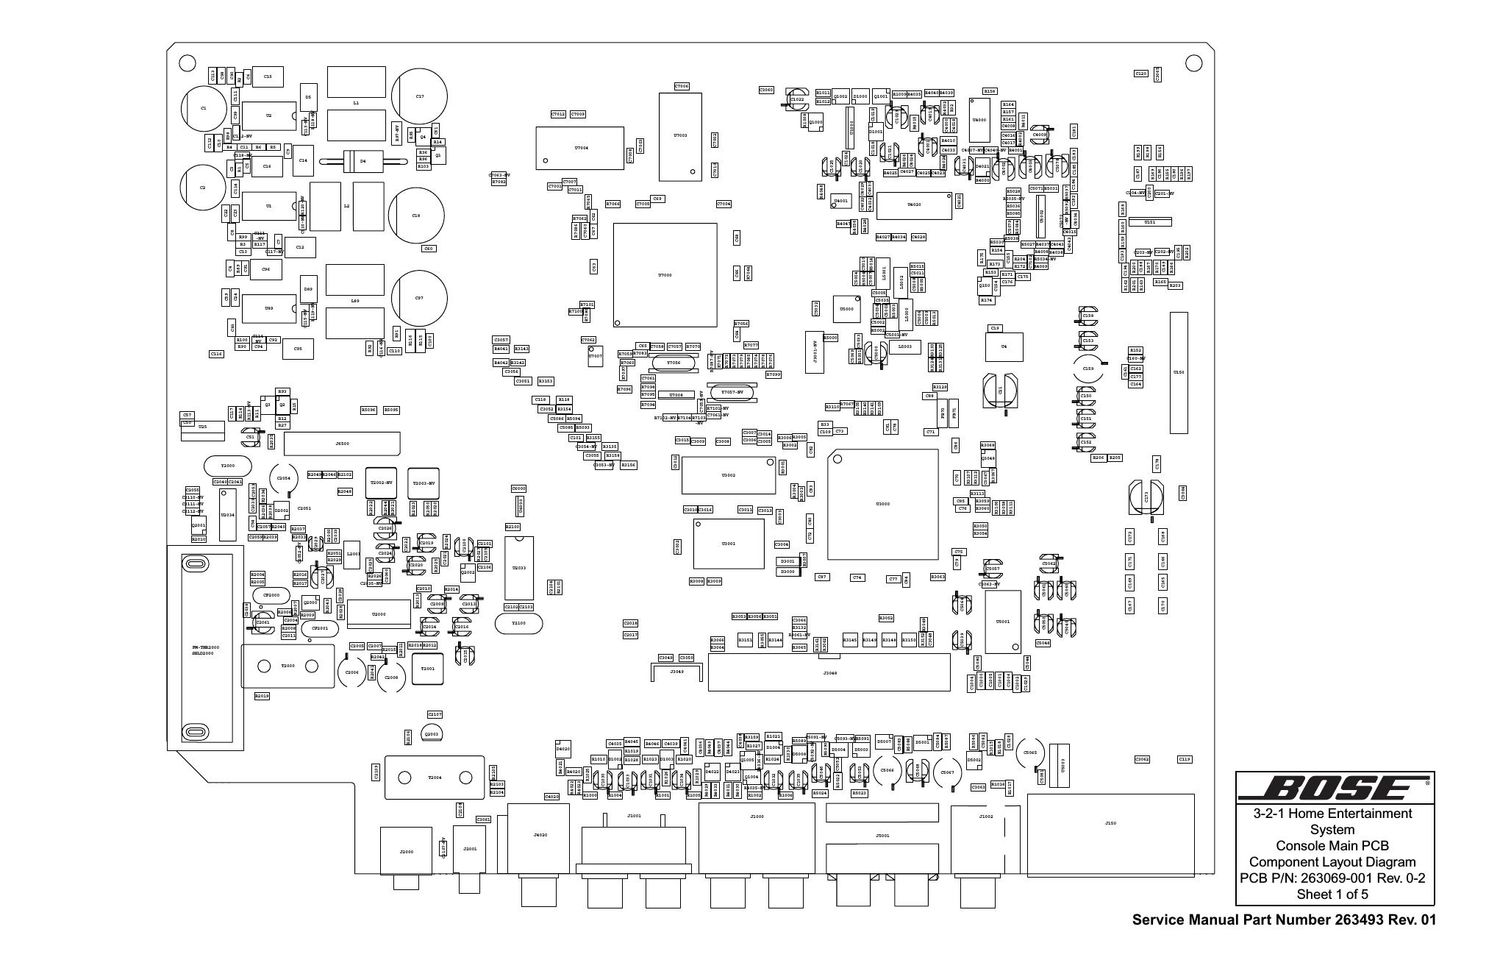 Audio Service Manuals - Free download bose 321 layout